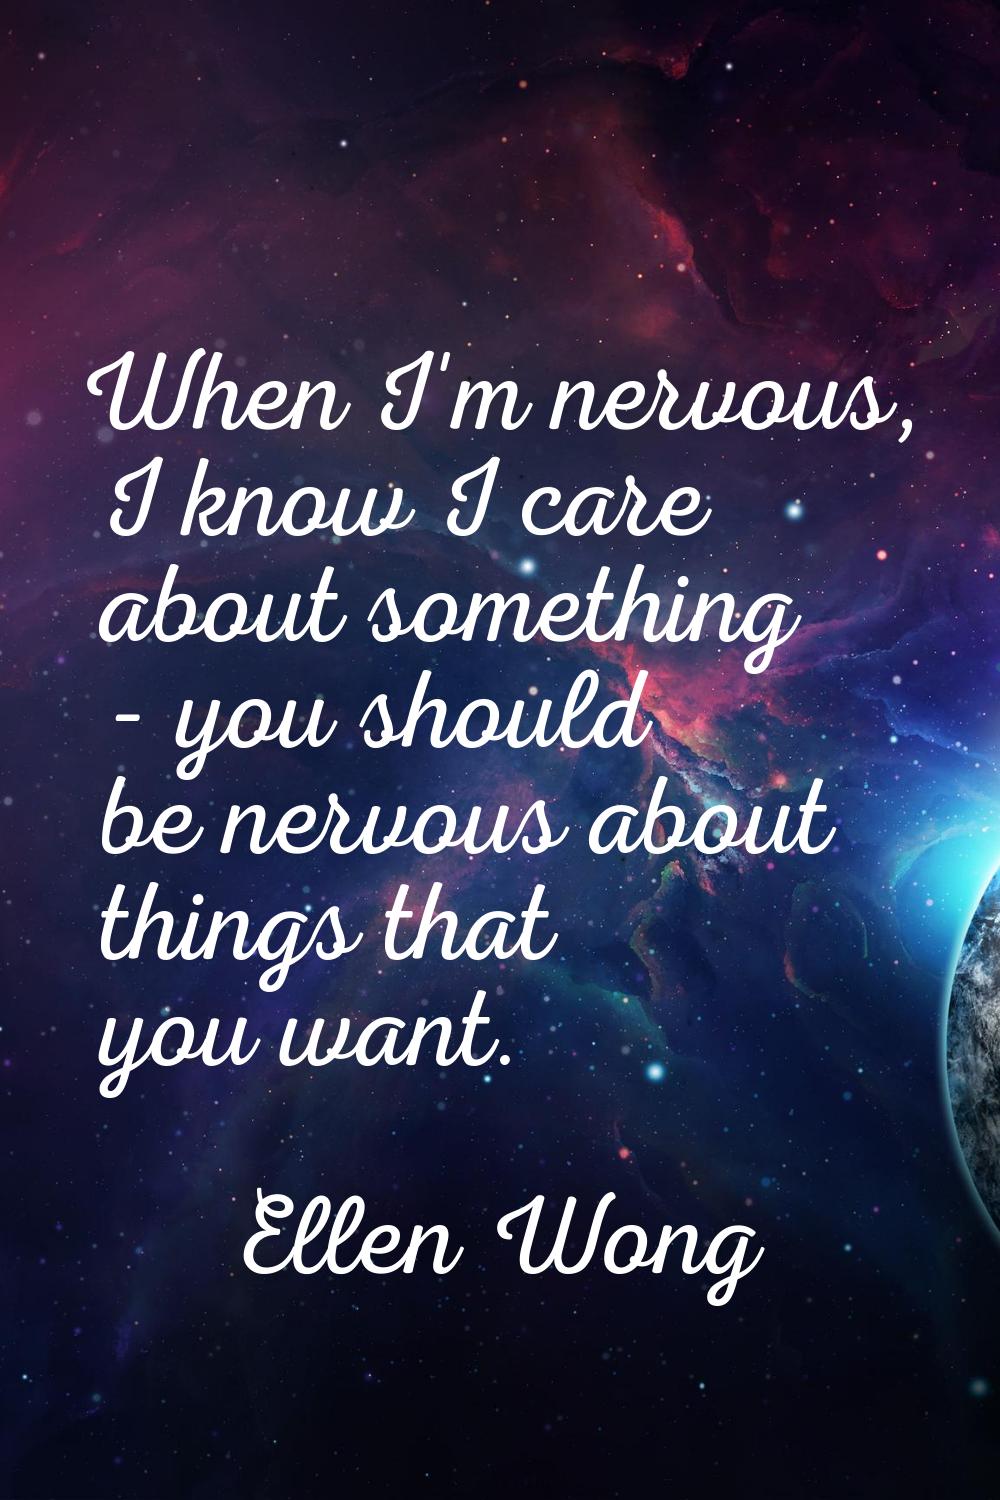 When I'm nervous, I know I care about something - you should be nervous about things that you want.